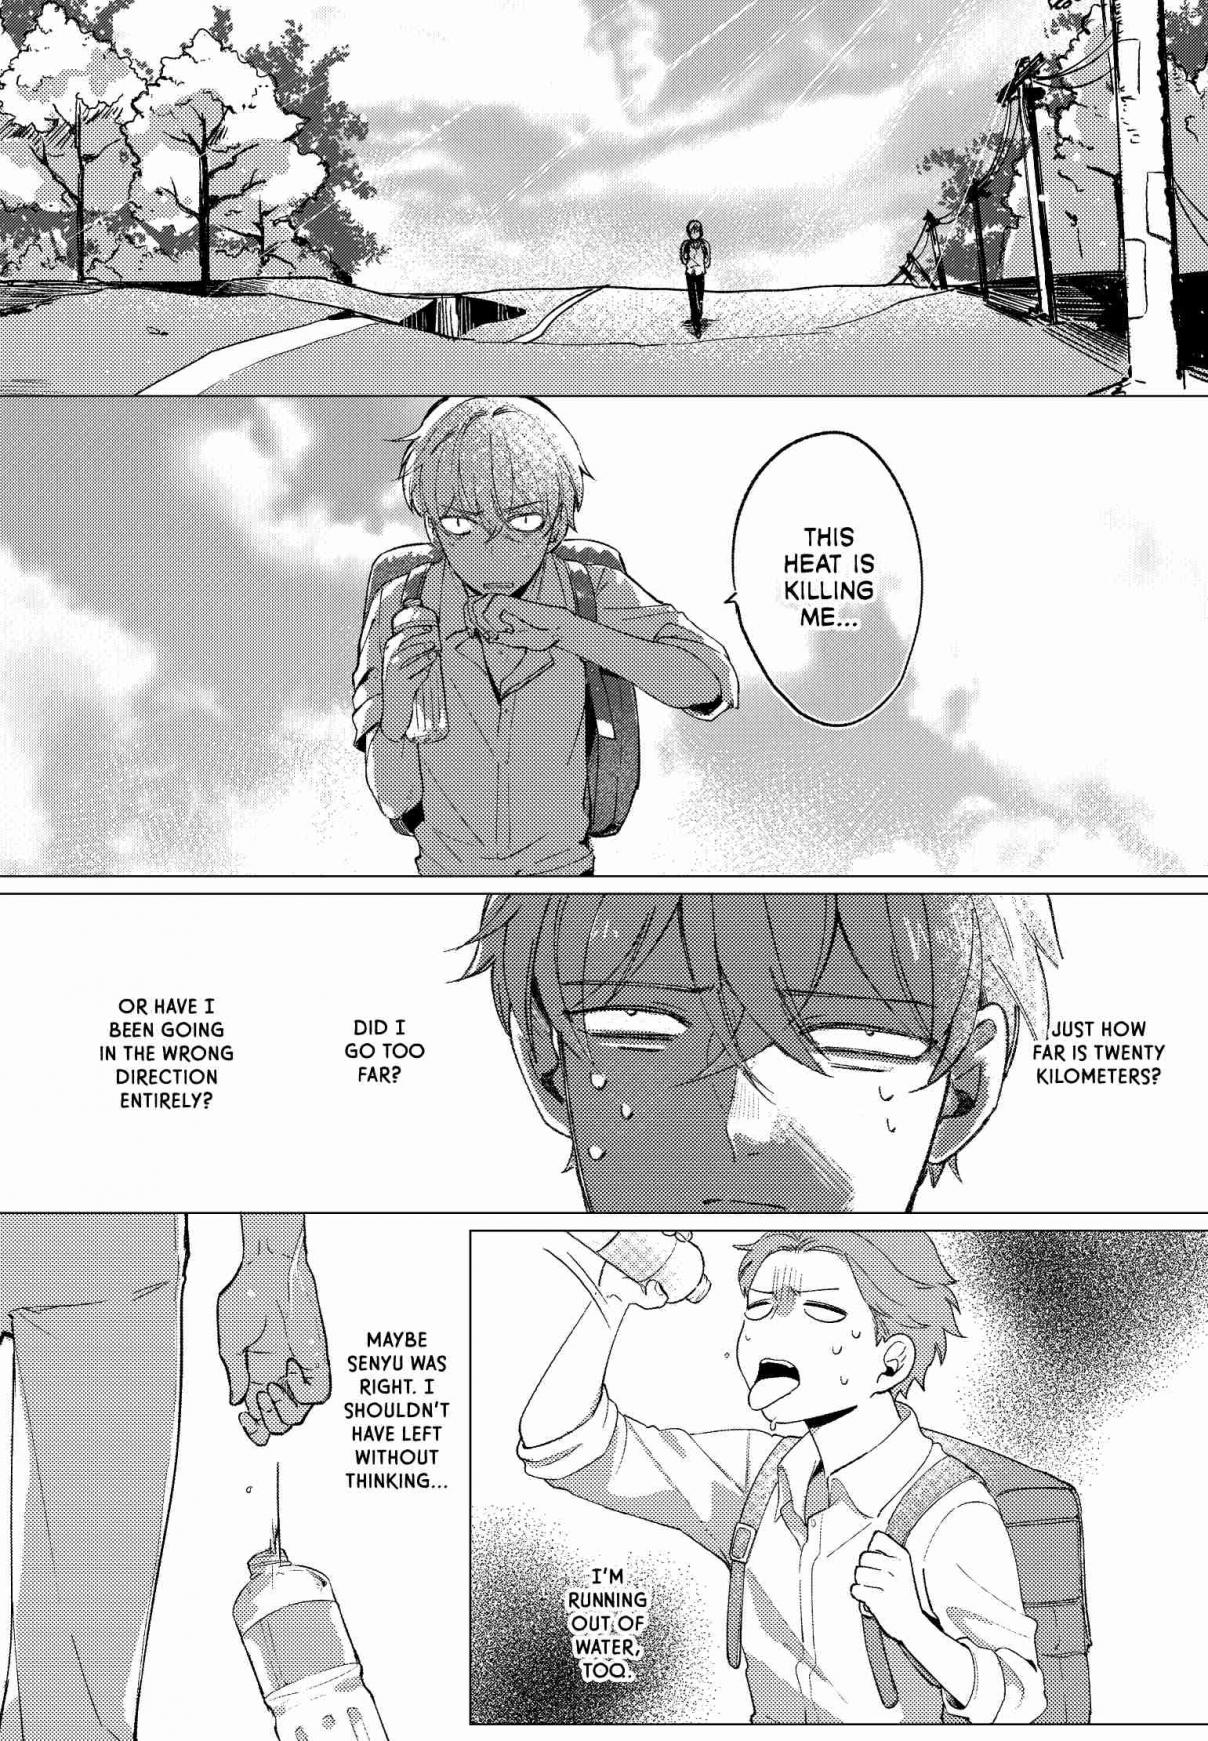 At The End Of The World, I Still Want To Be With You Vol. 1 Ch. 2 Day 2